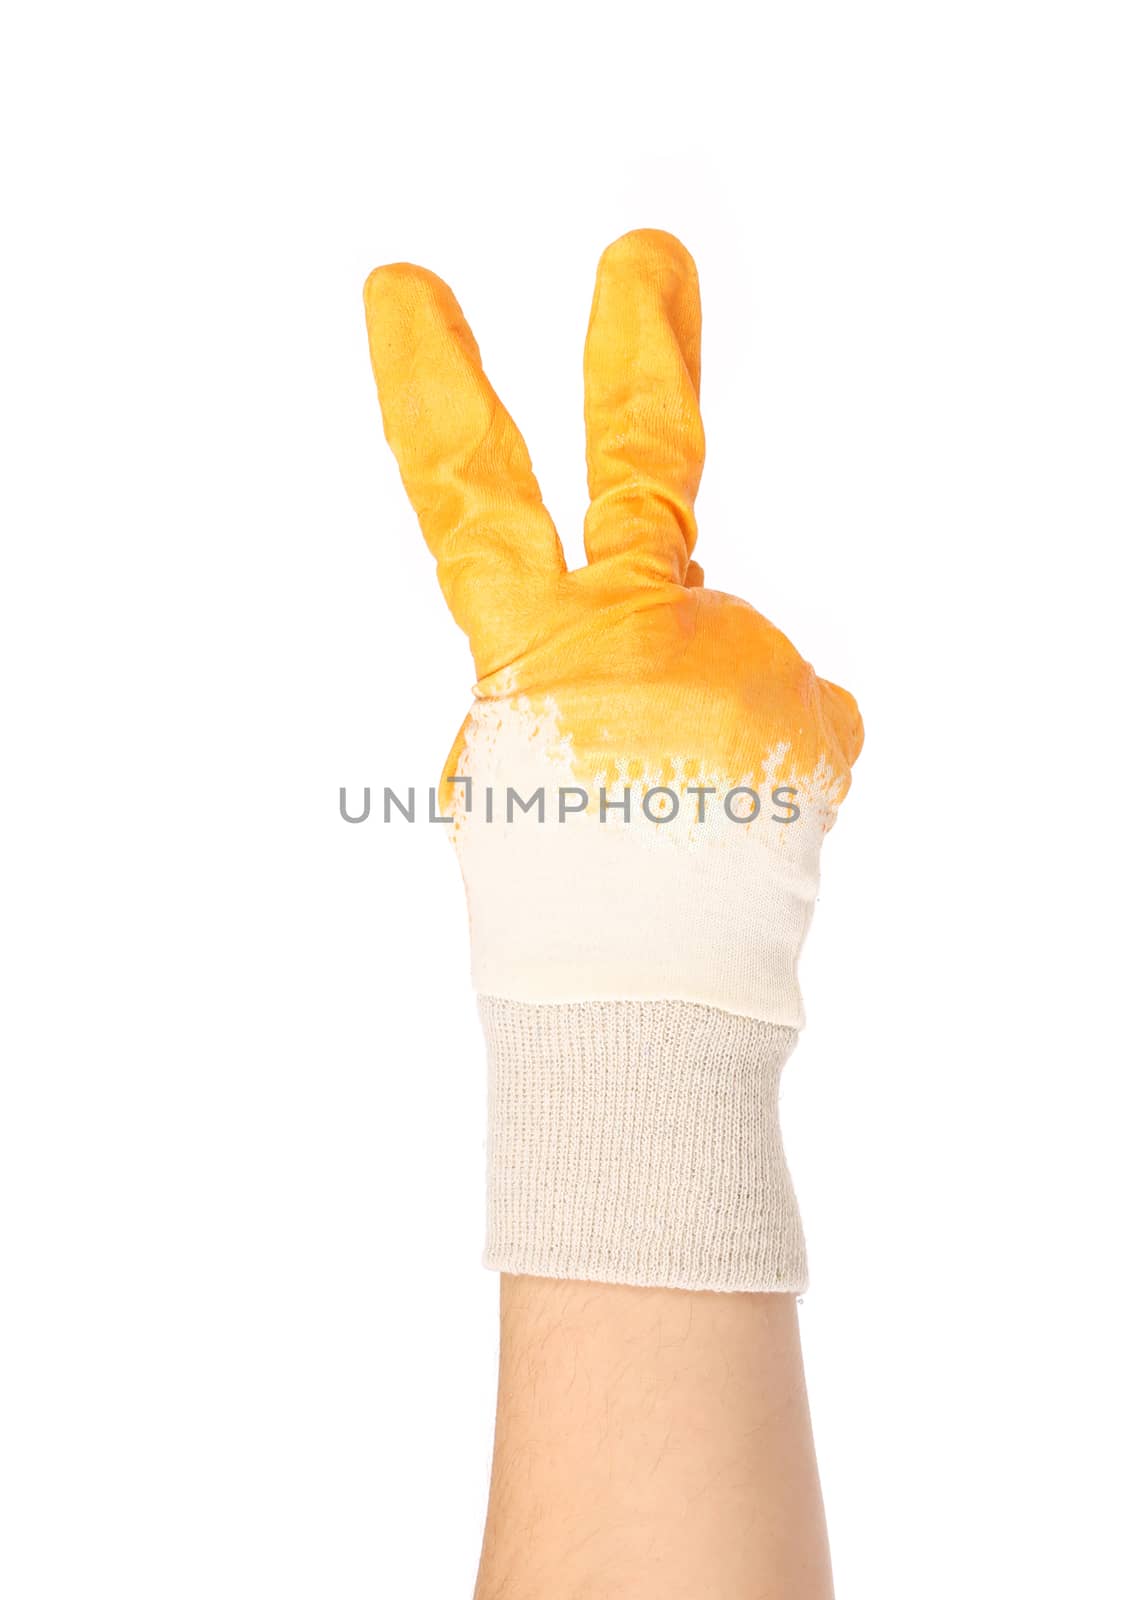 Hand in rubber glove shows two. Isolated on a white background.